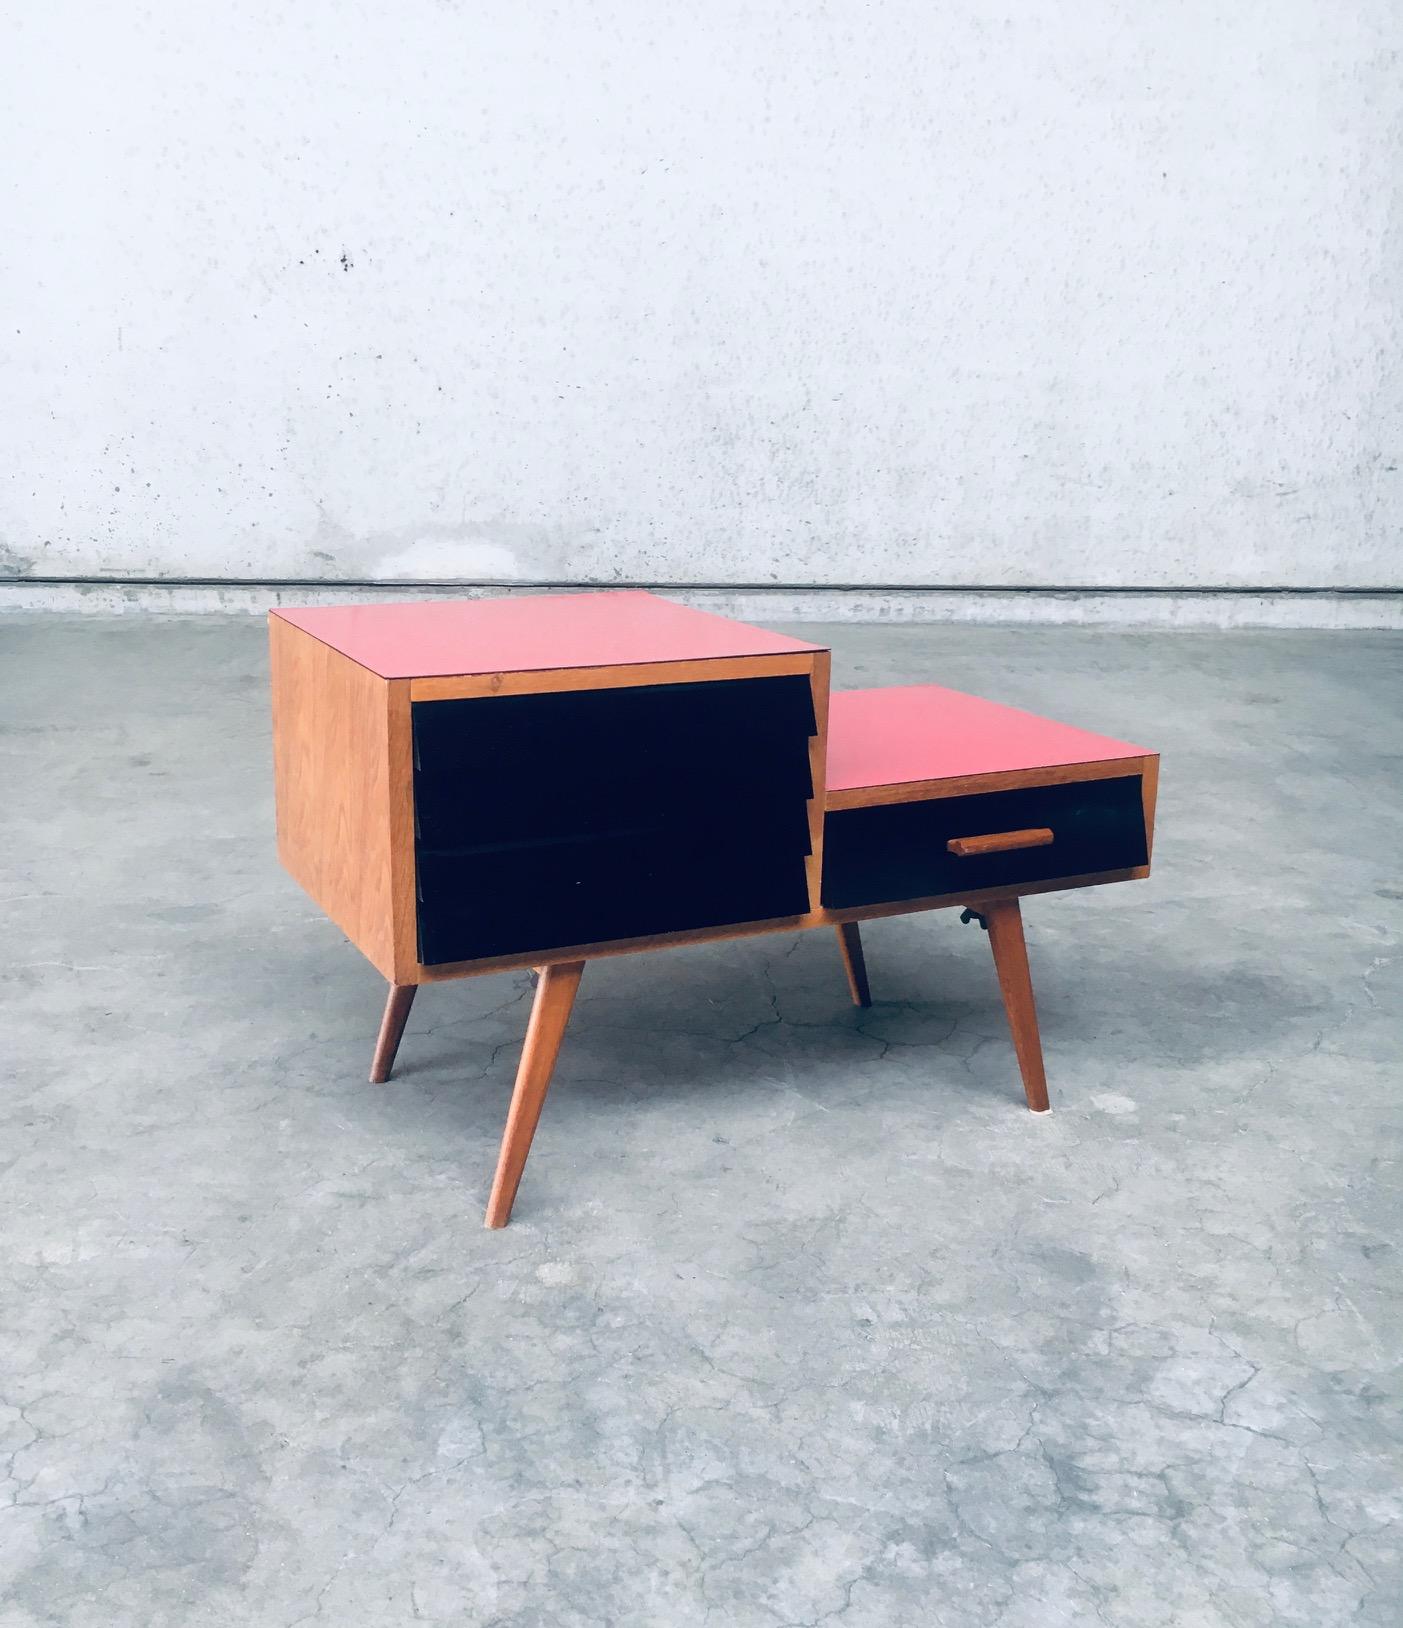 Vintage Midcentury Modern French Design Hi Fi Record Player Cabinet by Manufrance. Made in France, 1950's period. Marked on the inside: Manufrance, Saint Etienne. Nice well designed small cabinet which was made to put your record player on and hold